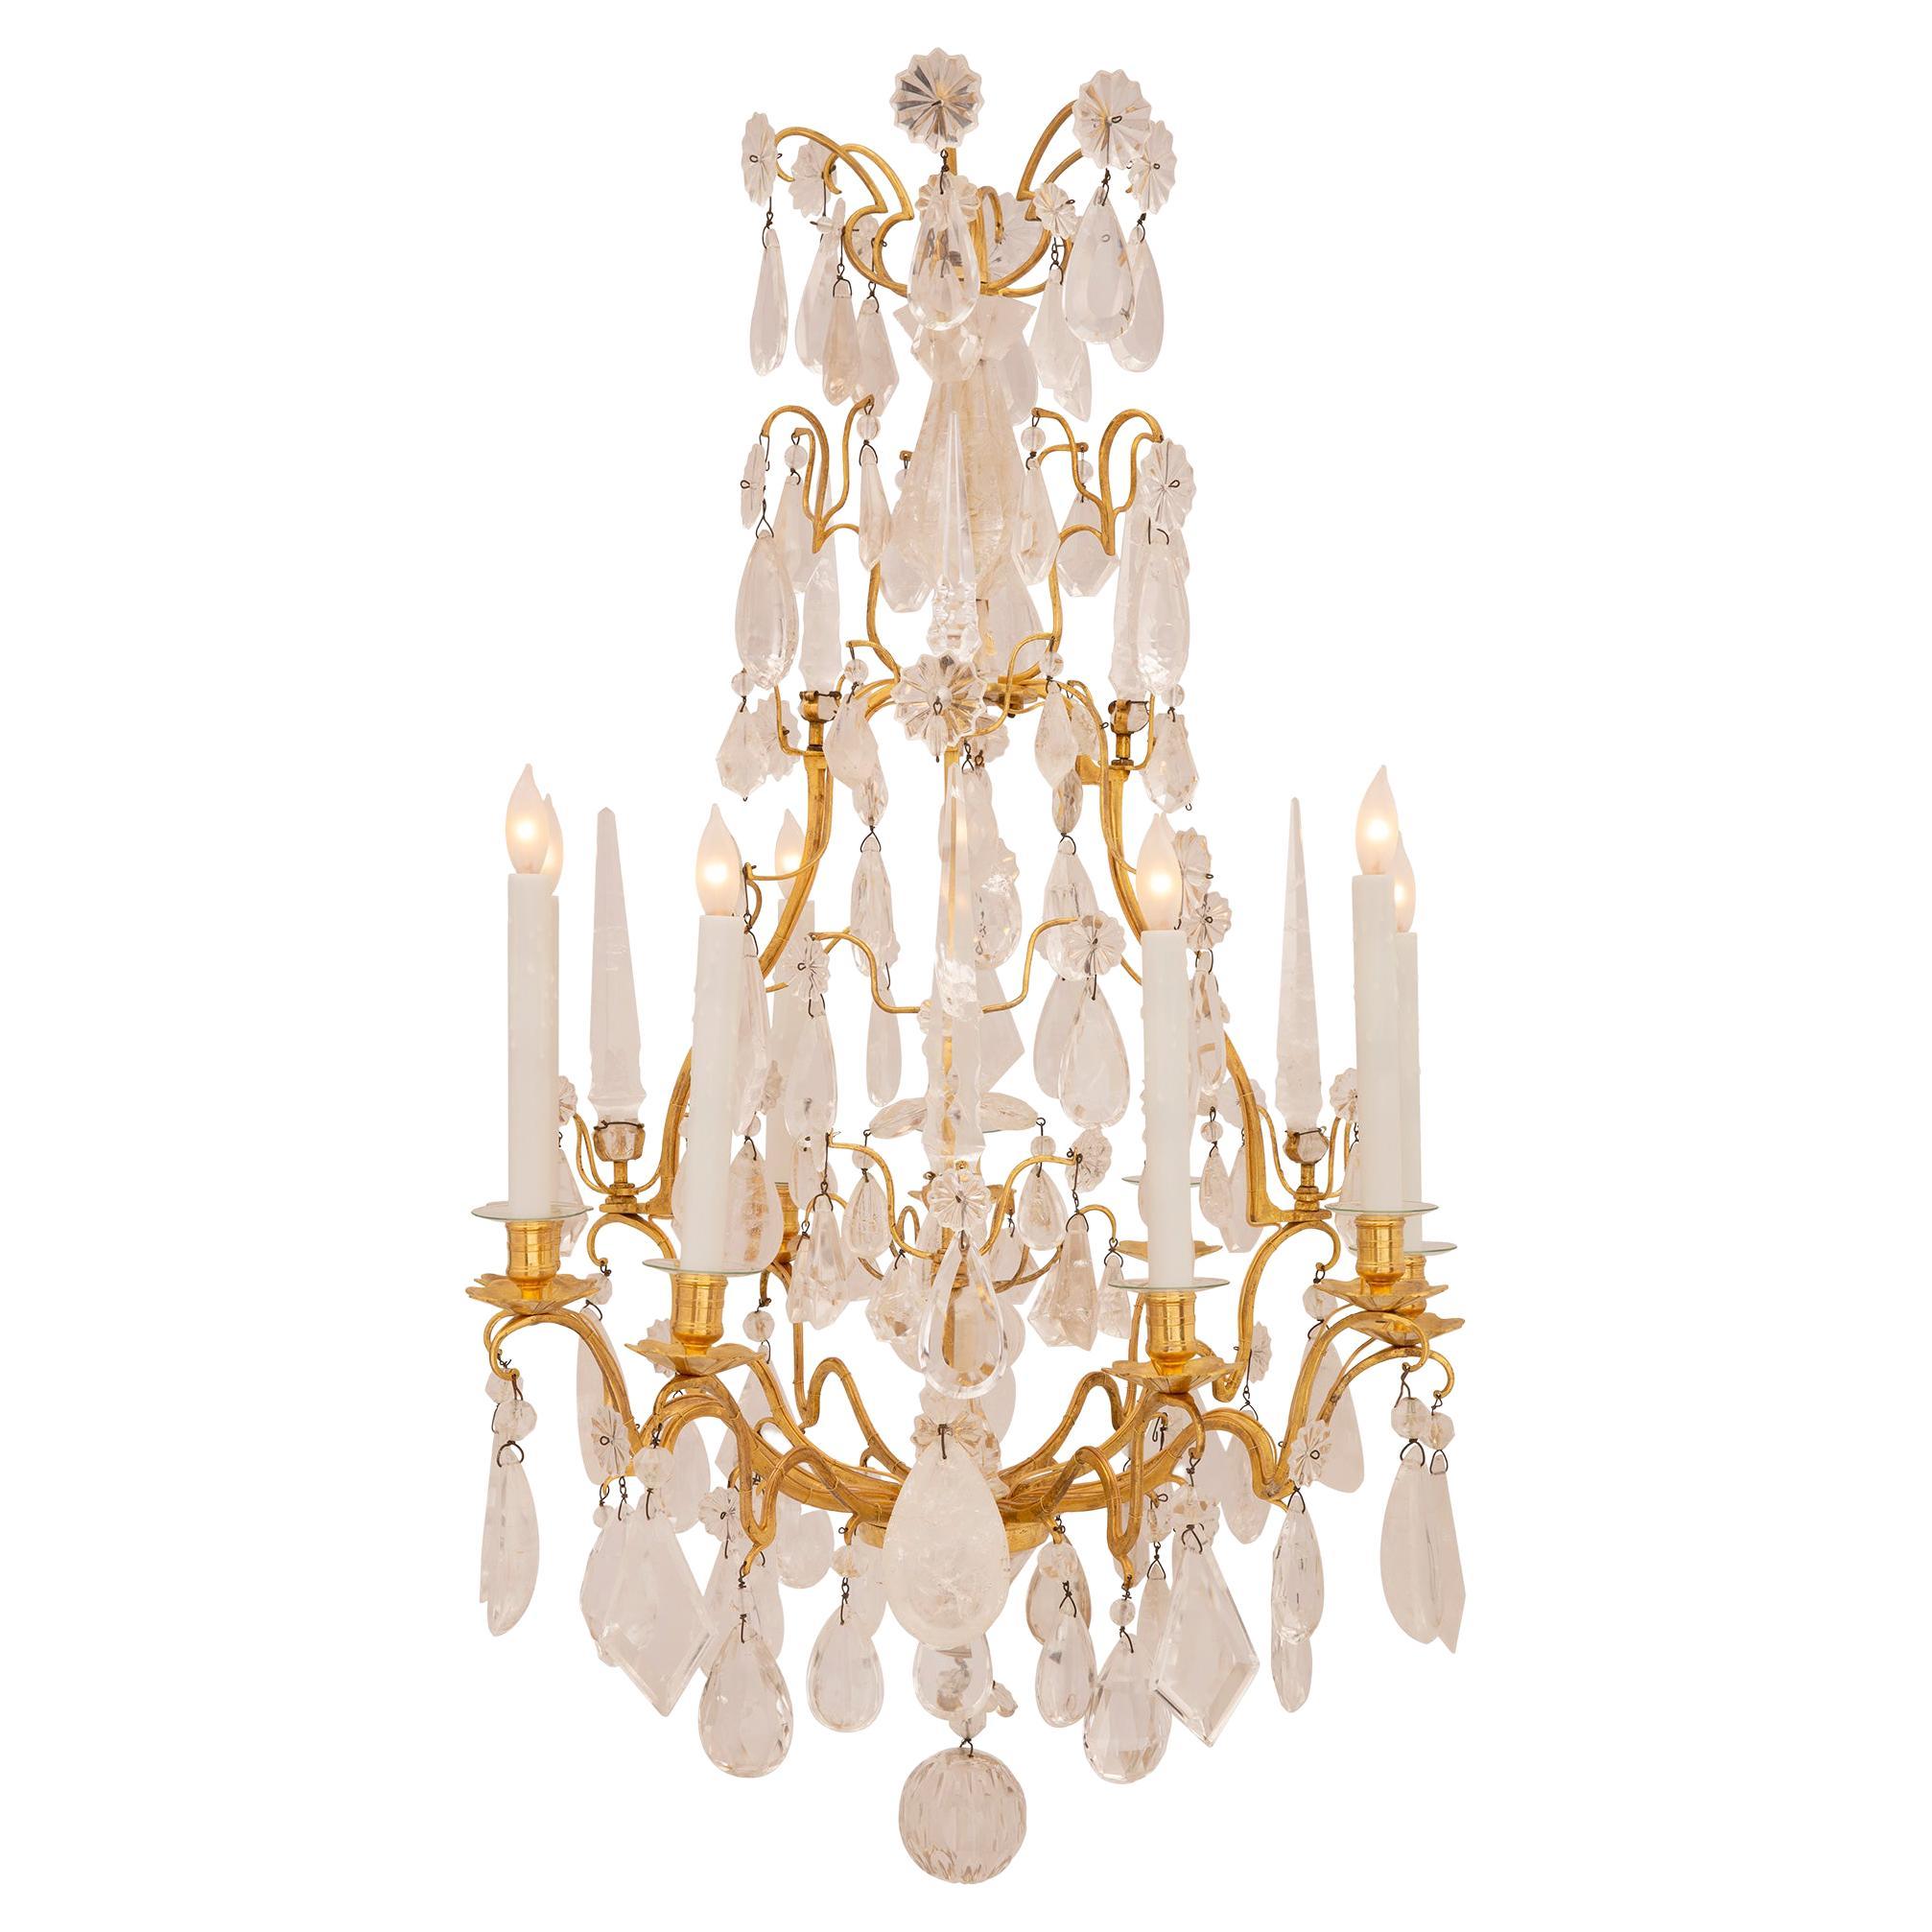 French 18th Century Louis XV Period Ormolu and Rock Crystal Chandelier